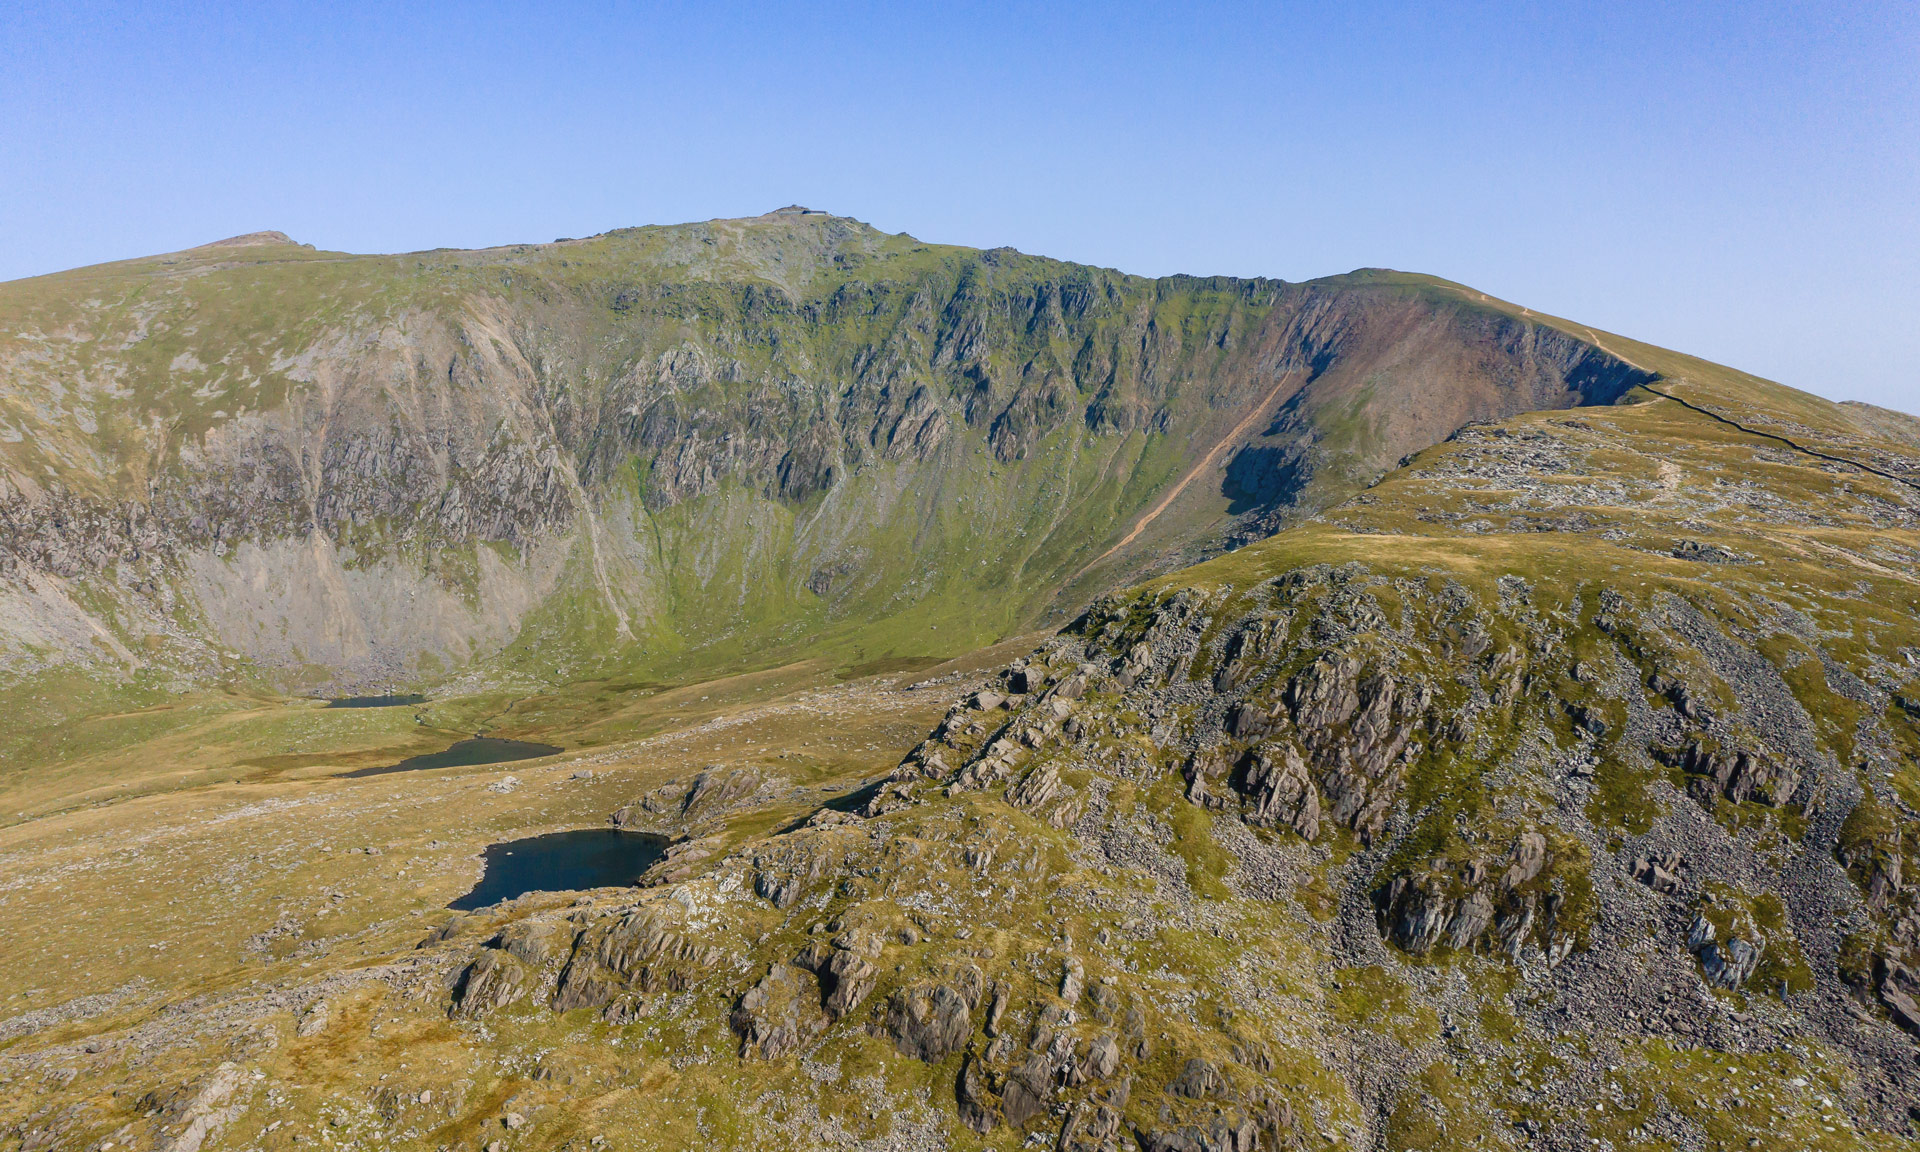 View of Snowdon's summit with the Snowdon Ranger path acsending up towards it